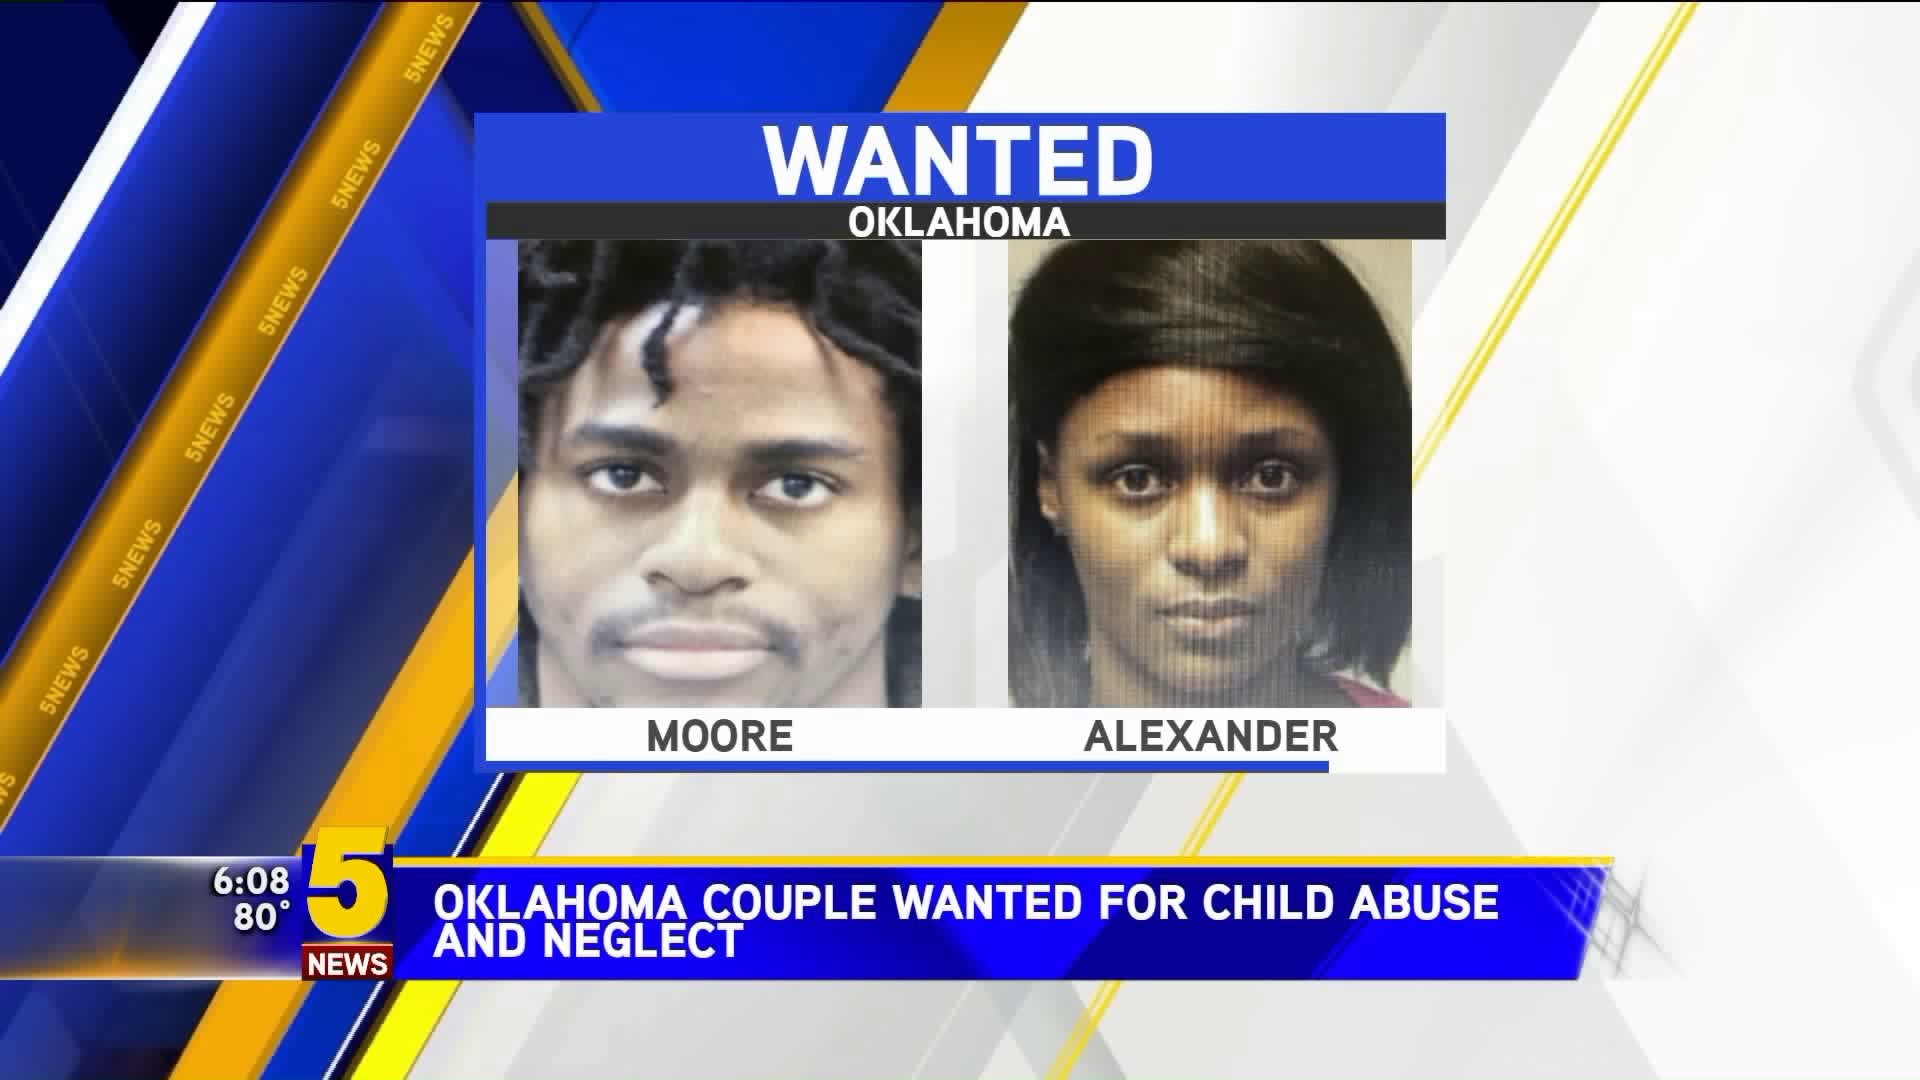 Oklahoma Couple Wanted for Child Abuse and Neglect